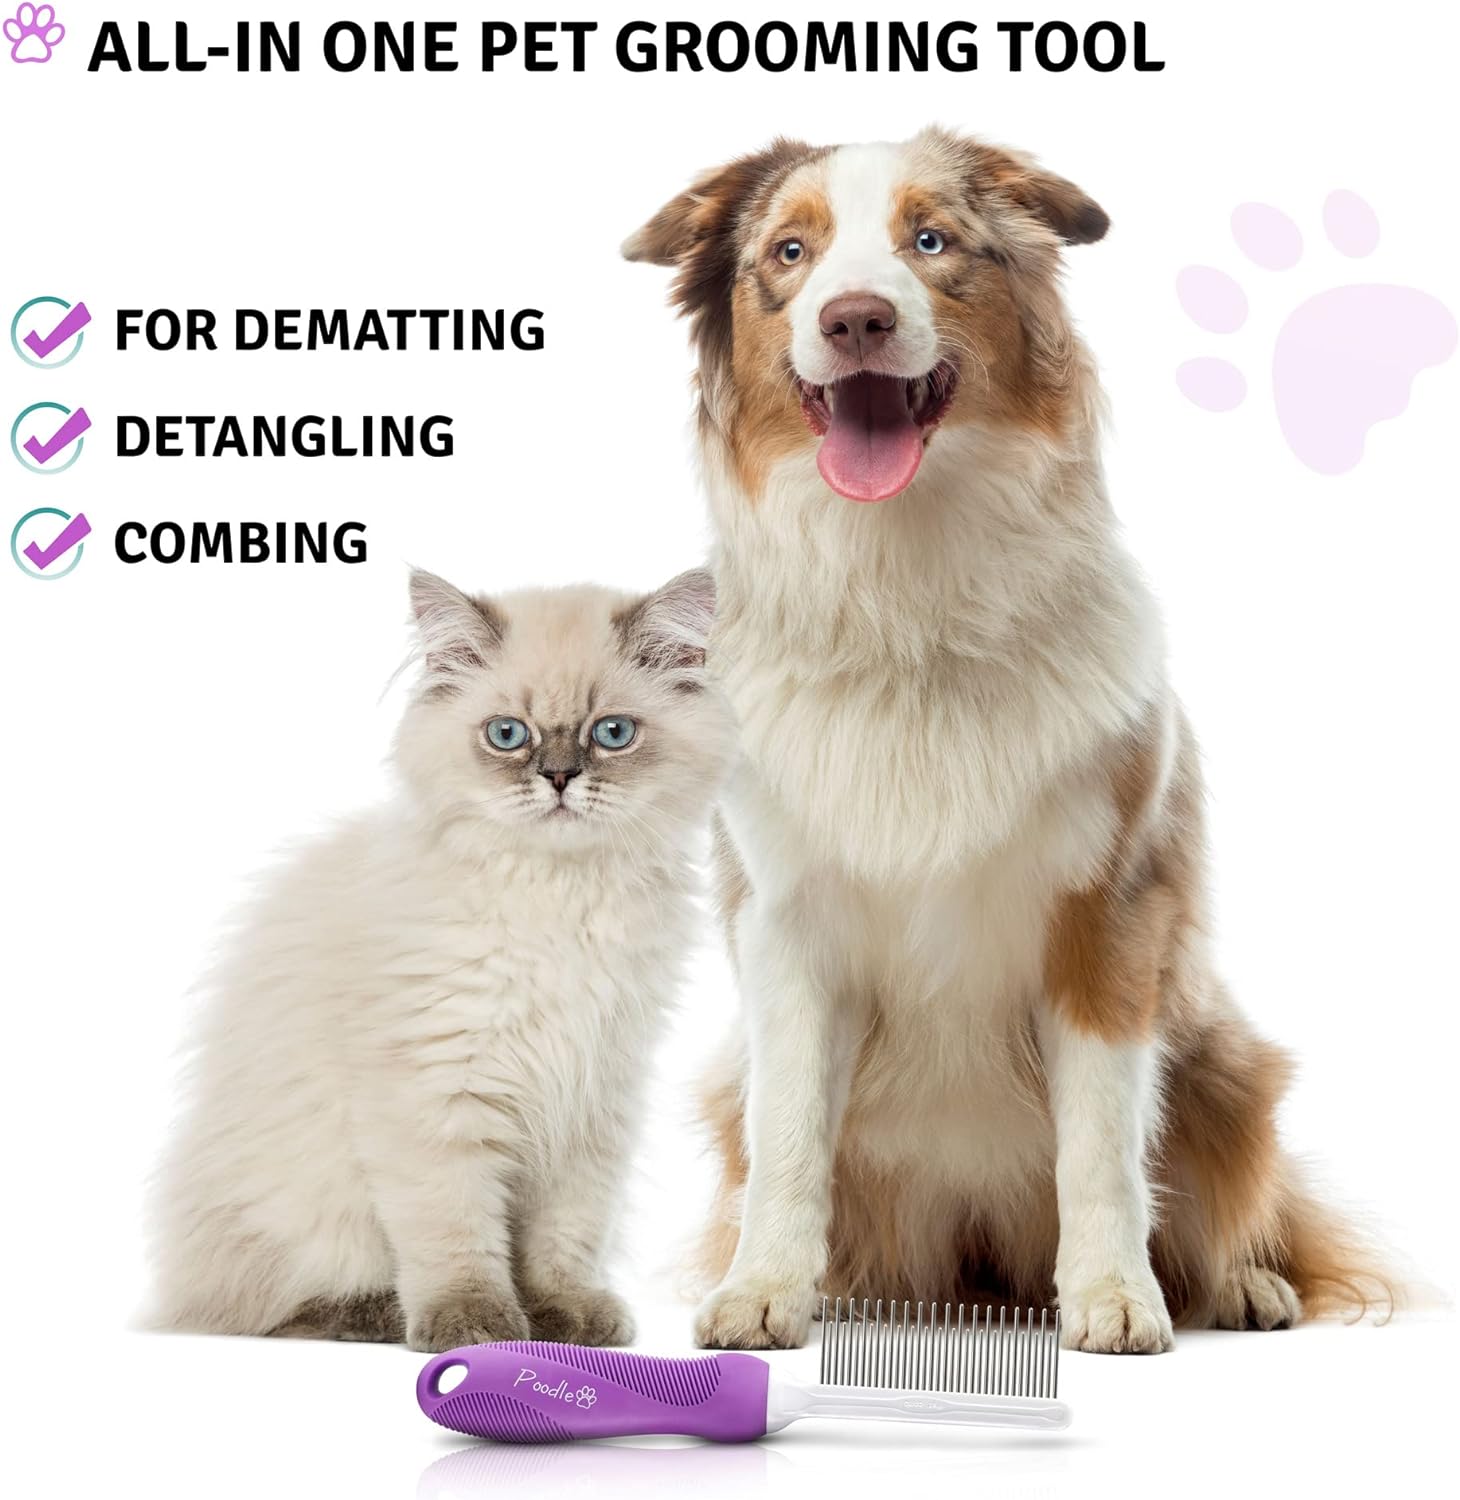 Poodle Pet 2-in-1 Stainless Steel Detangler Comb Cat & Dog Grooming Brush - image 9 of 9